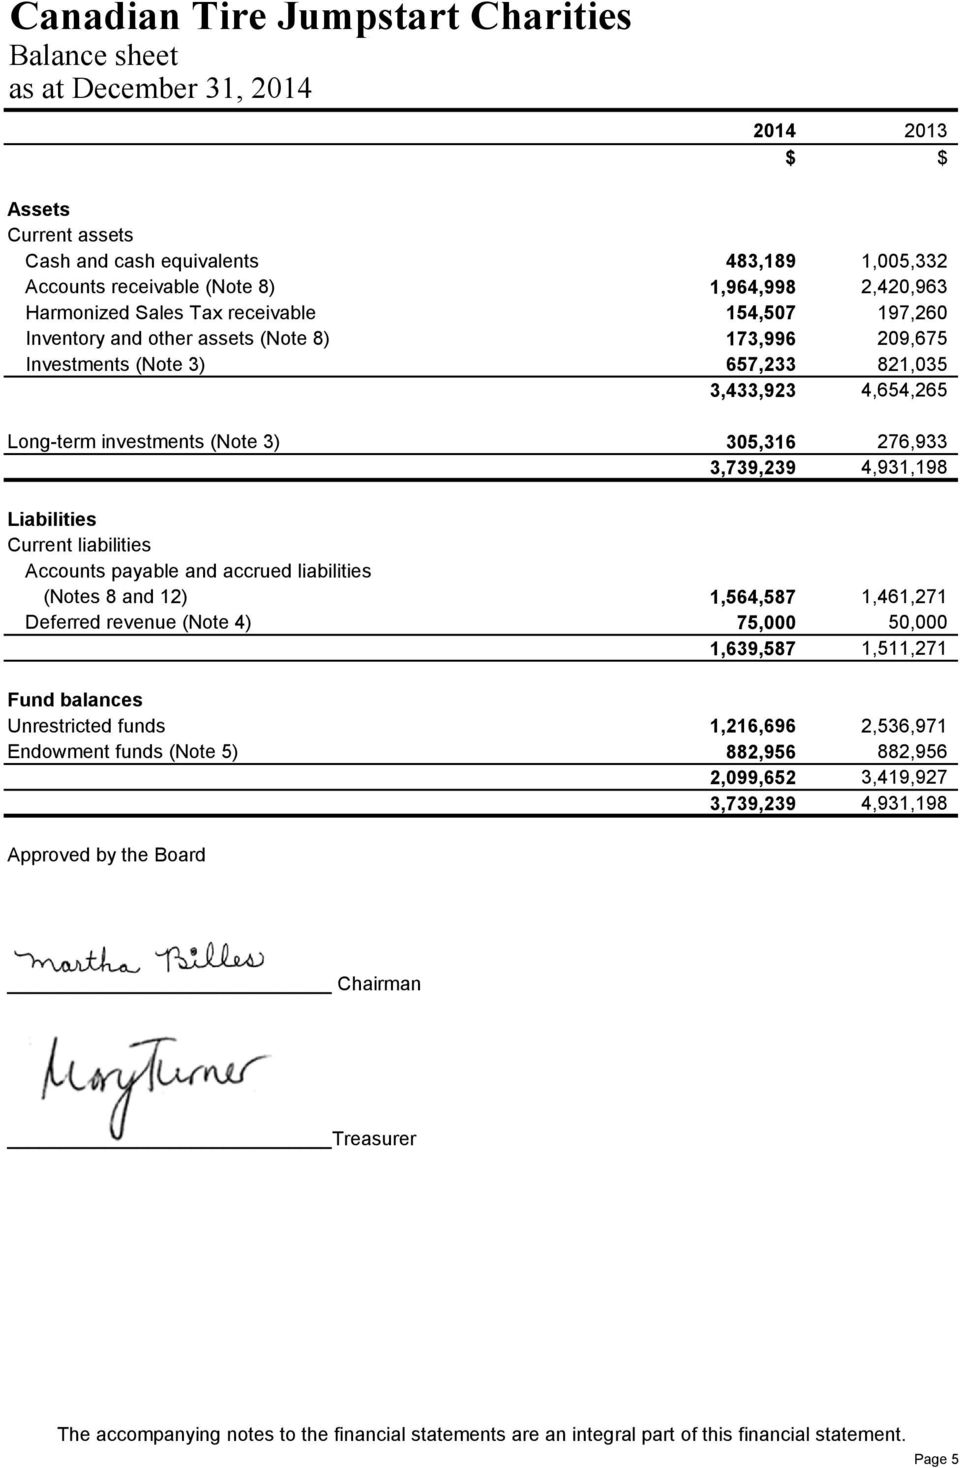 Accounts payable and accrued liabilities (Notes 8 and 12) 1,564,587 1,461,271 Deferred revenue (Note 4) 75,000 50,000 1,639,587 1,511,271 Fund balances Unrestricted funds 1,216,696 2,536,971